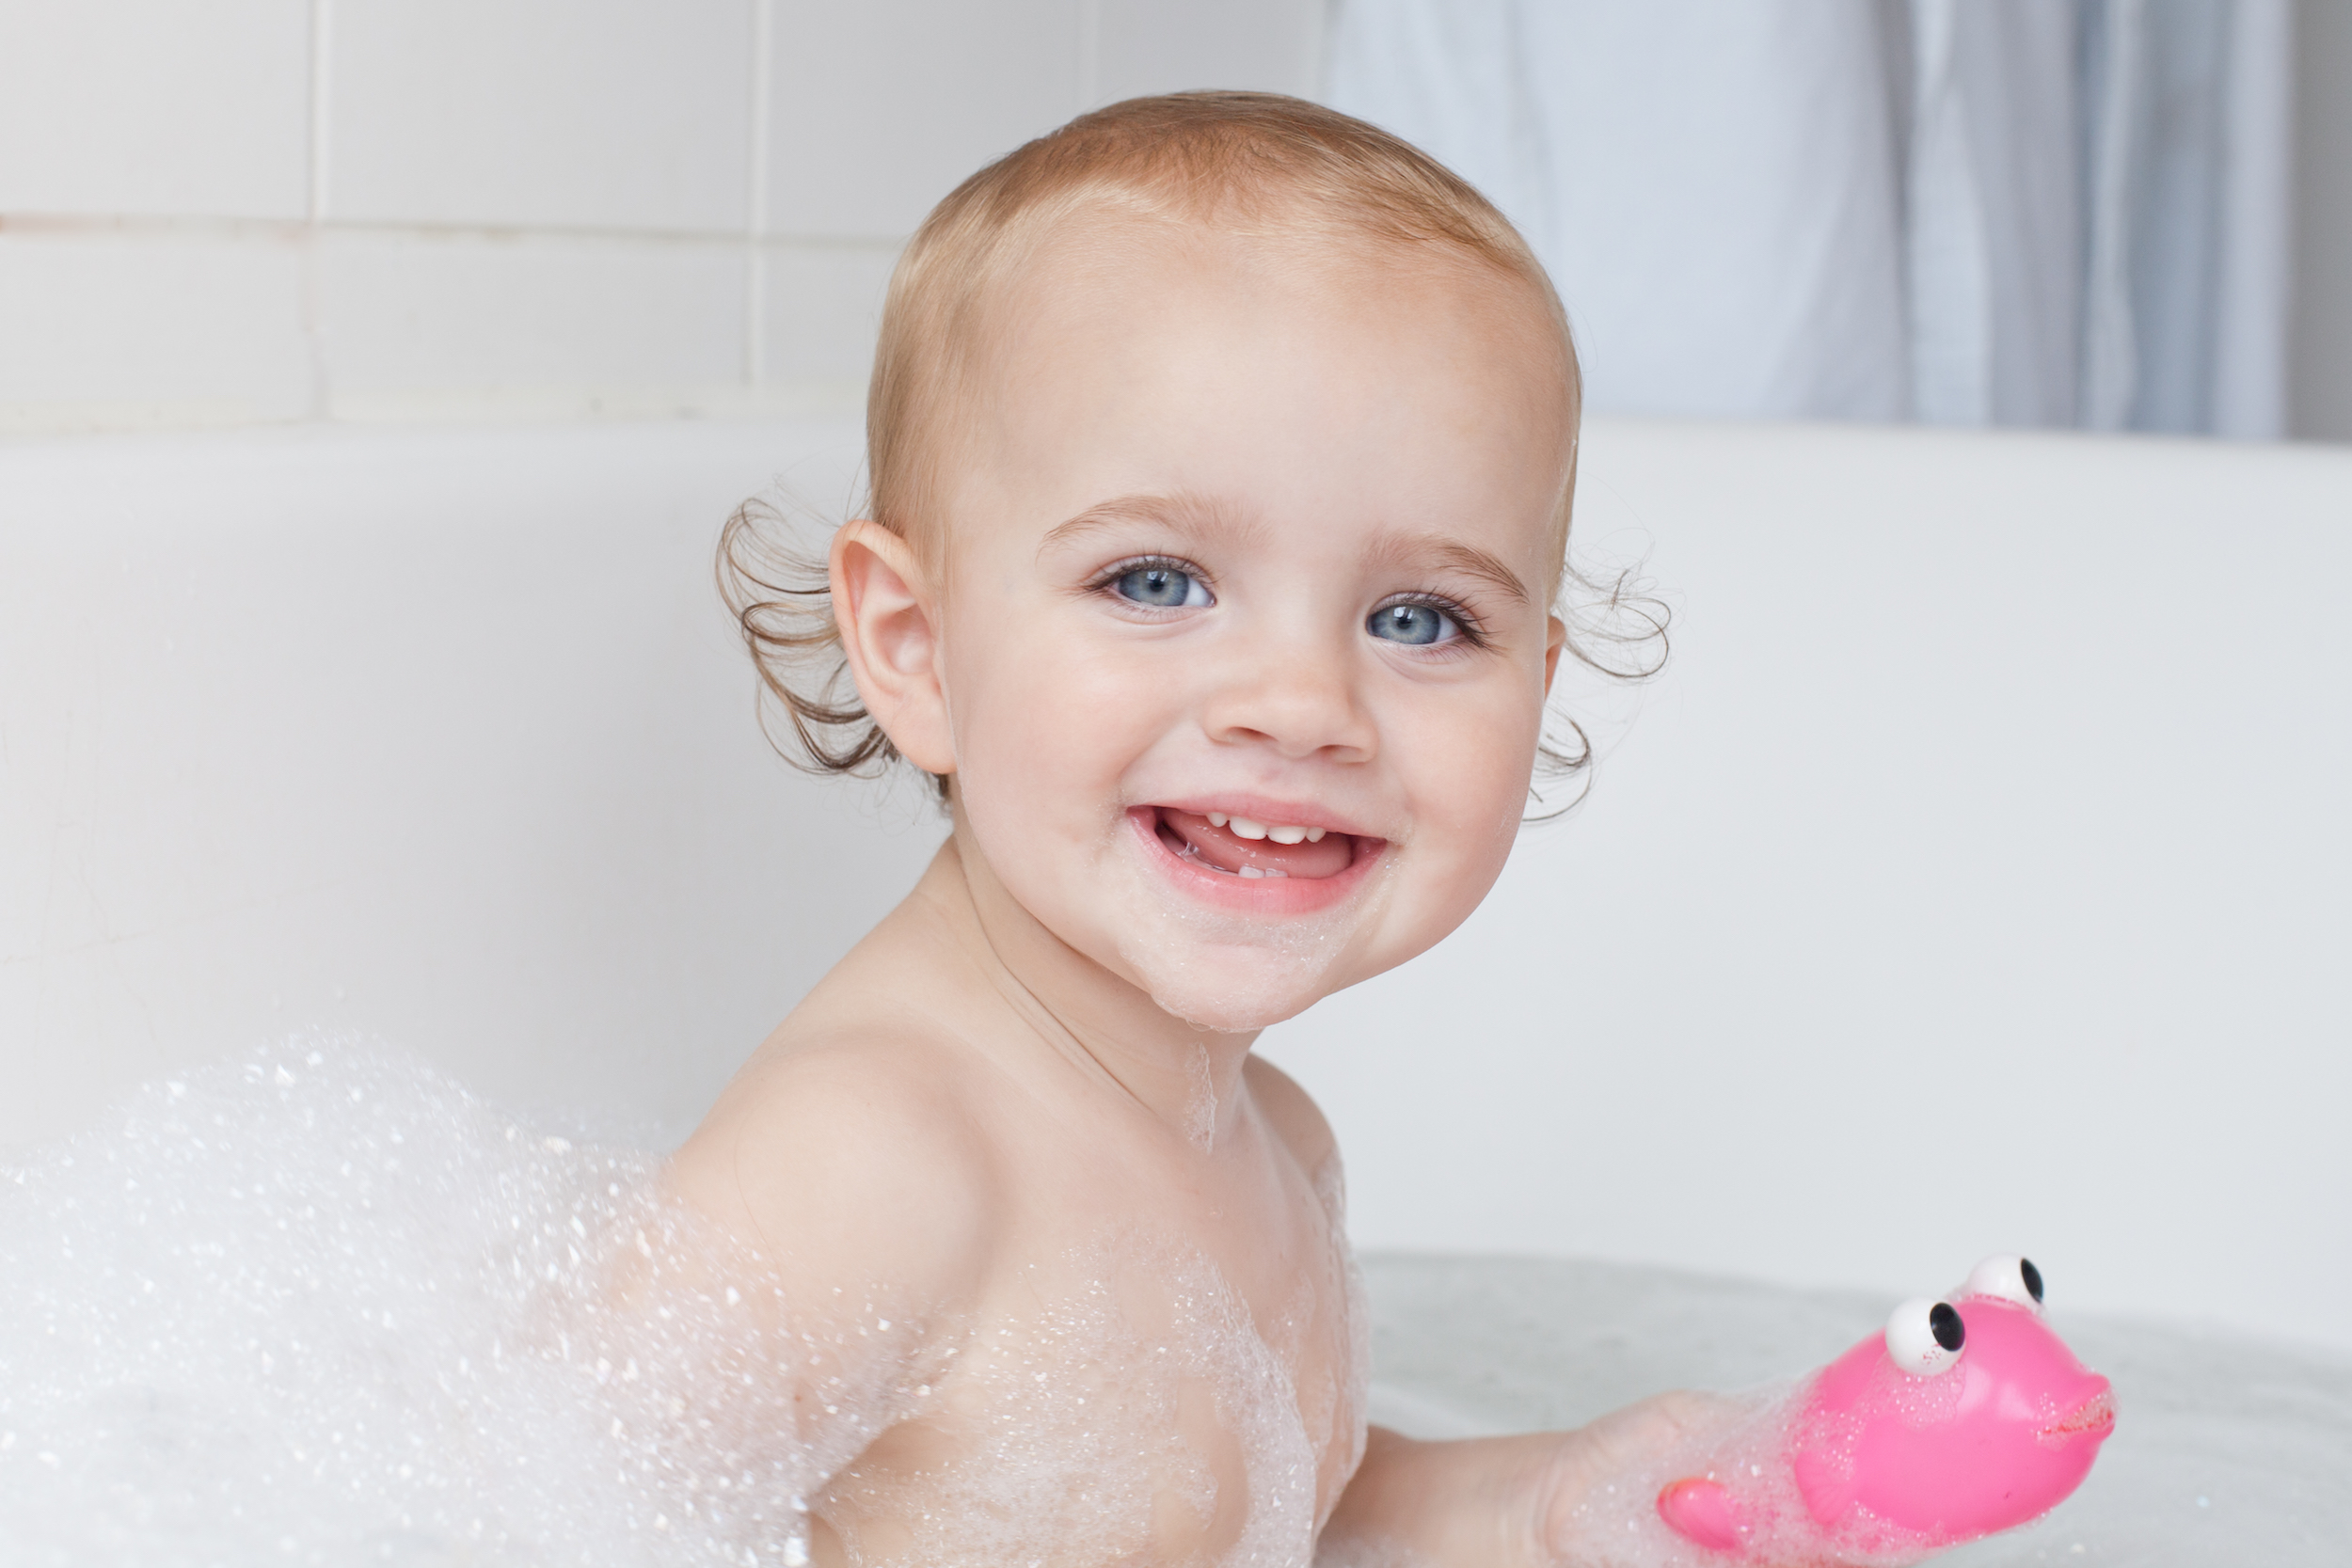 How to remove chlorine & chemicals from bath water. Safely bathe your kids by removing chlorine, chloramines and heavy metals with these 3 ingredients. 